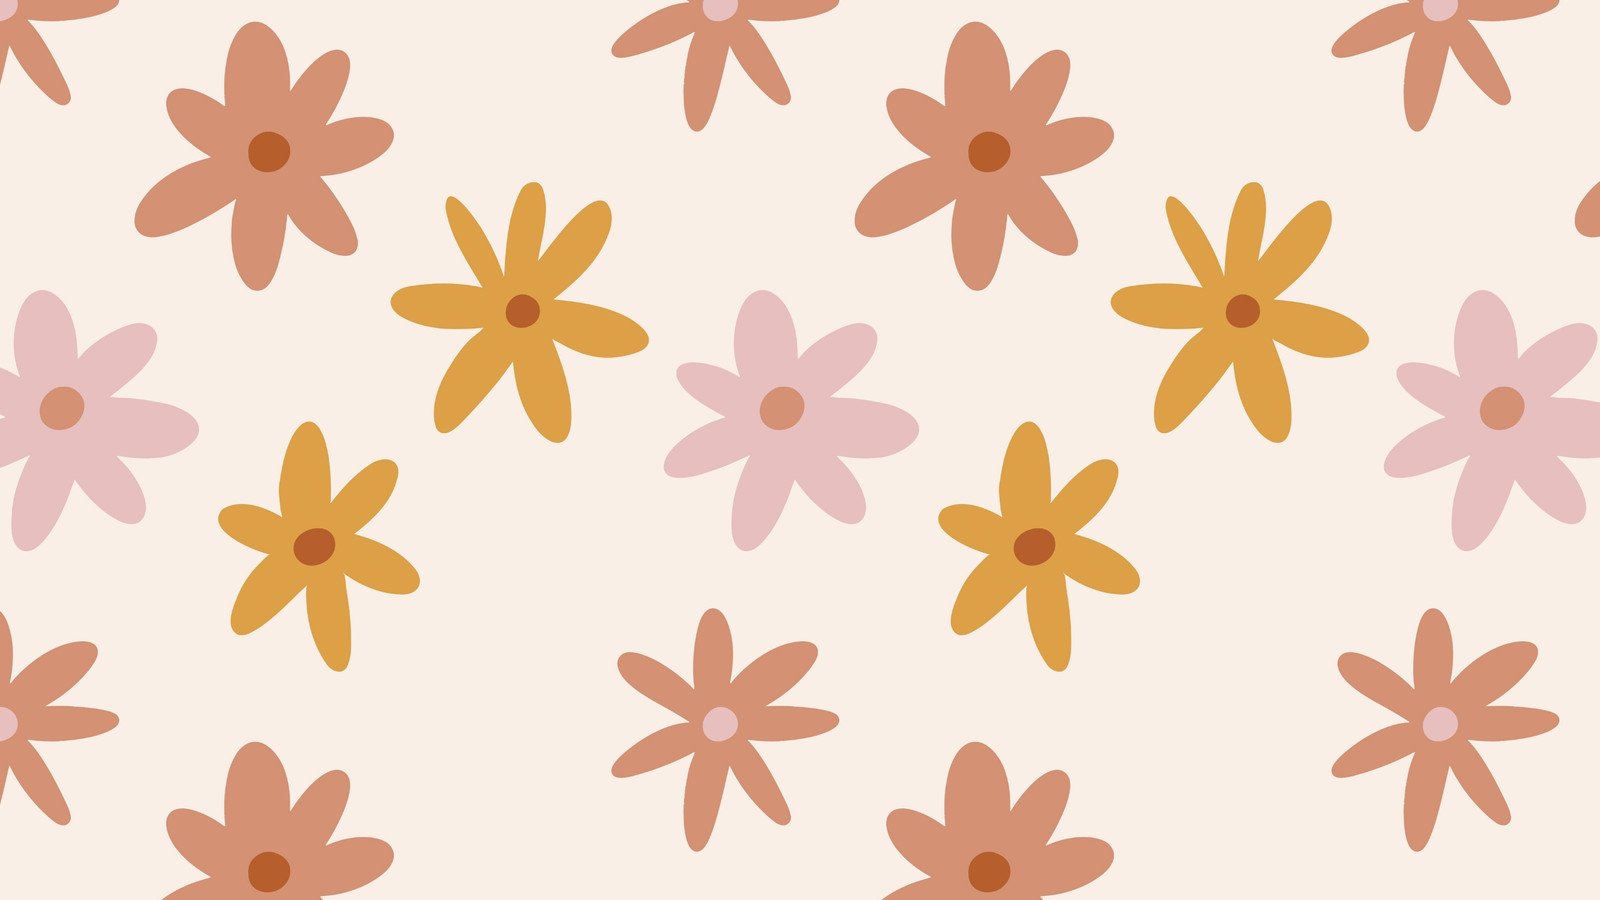 Page 2 - Free and customizable floral desktop wallpaper templates